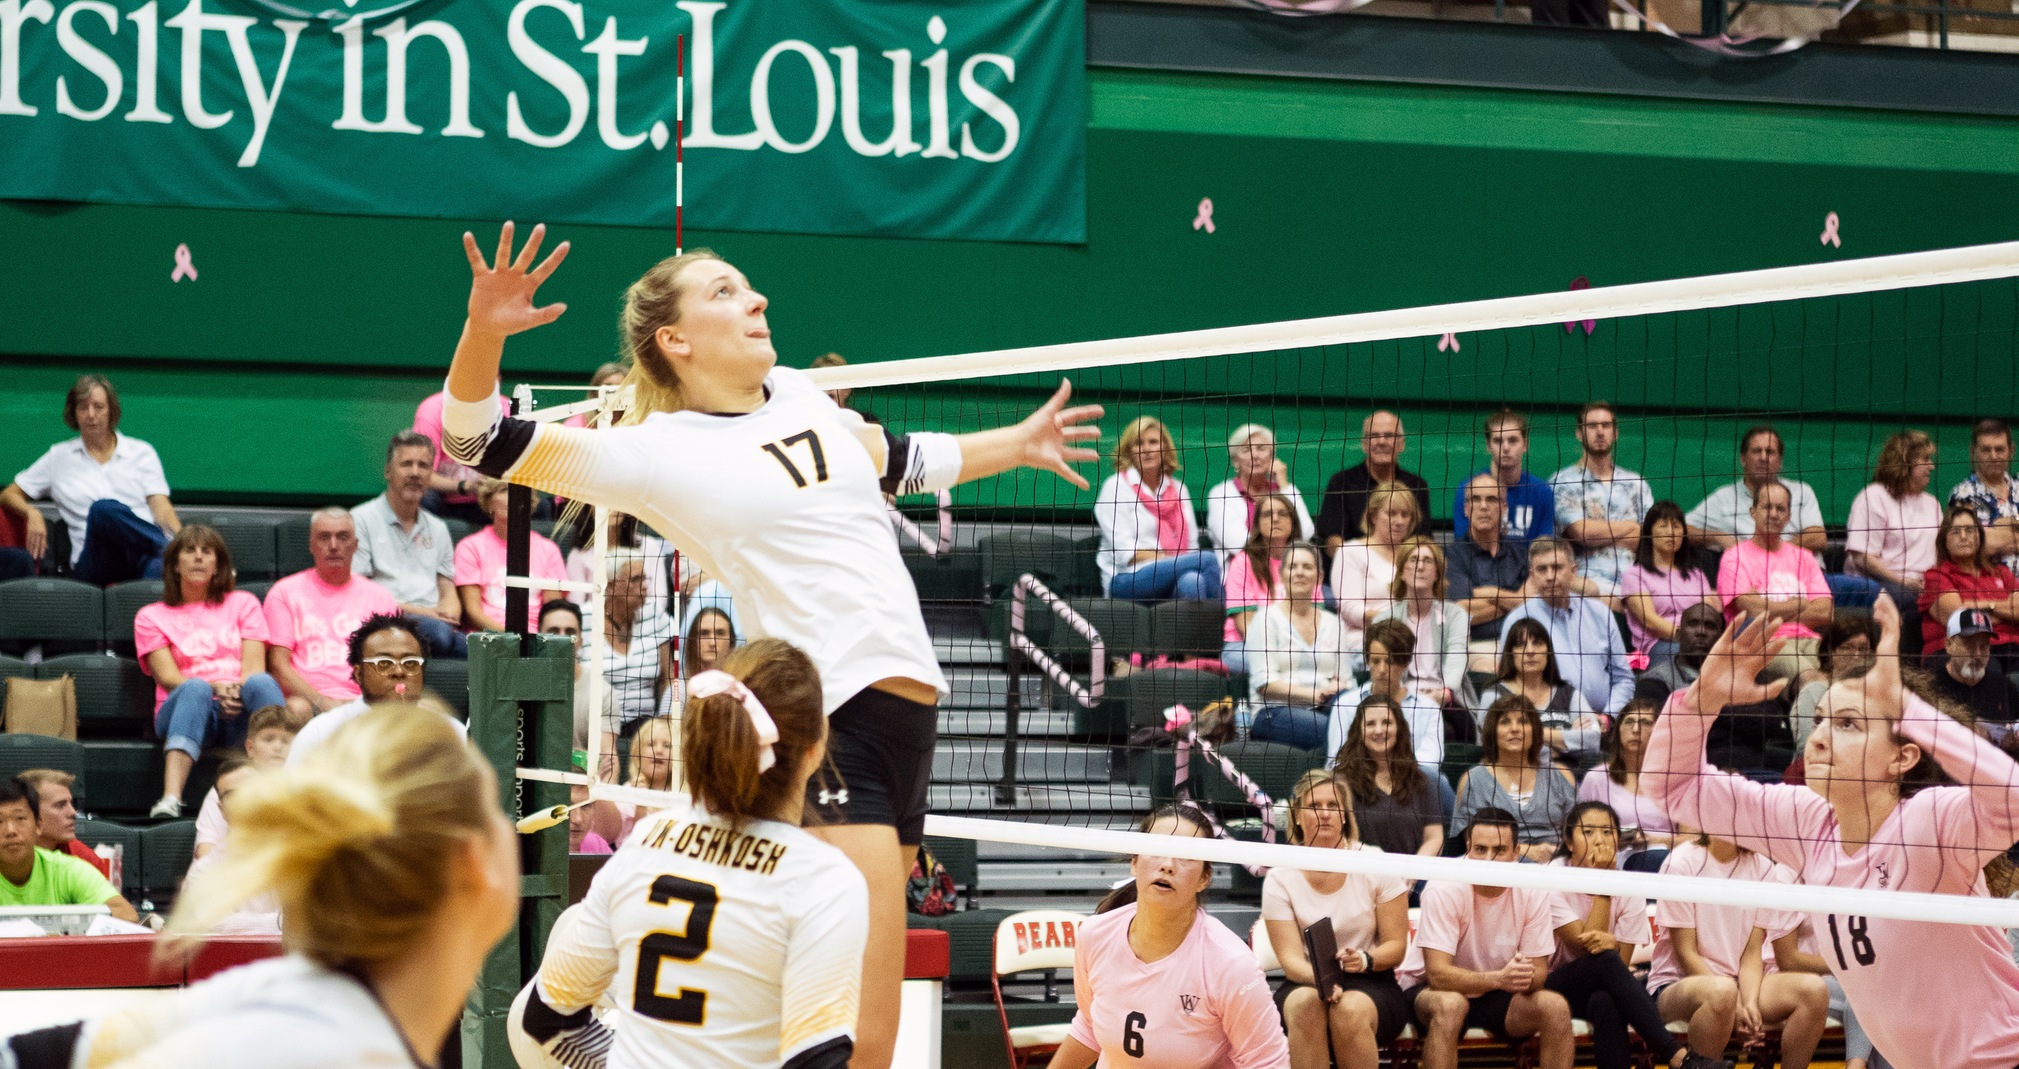 Taylor Allen totaled 11 kills against the Vikings and Tigers.